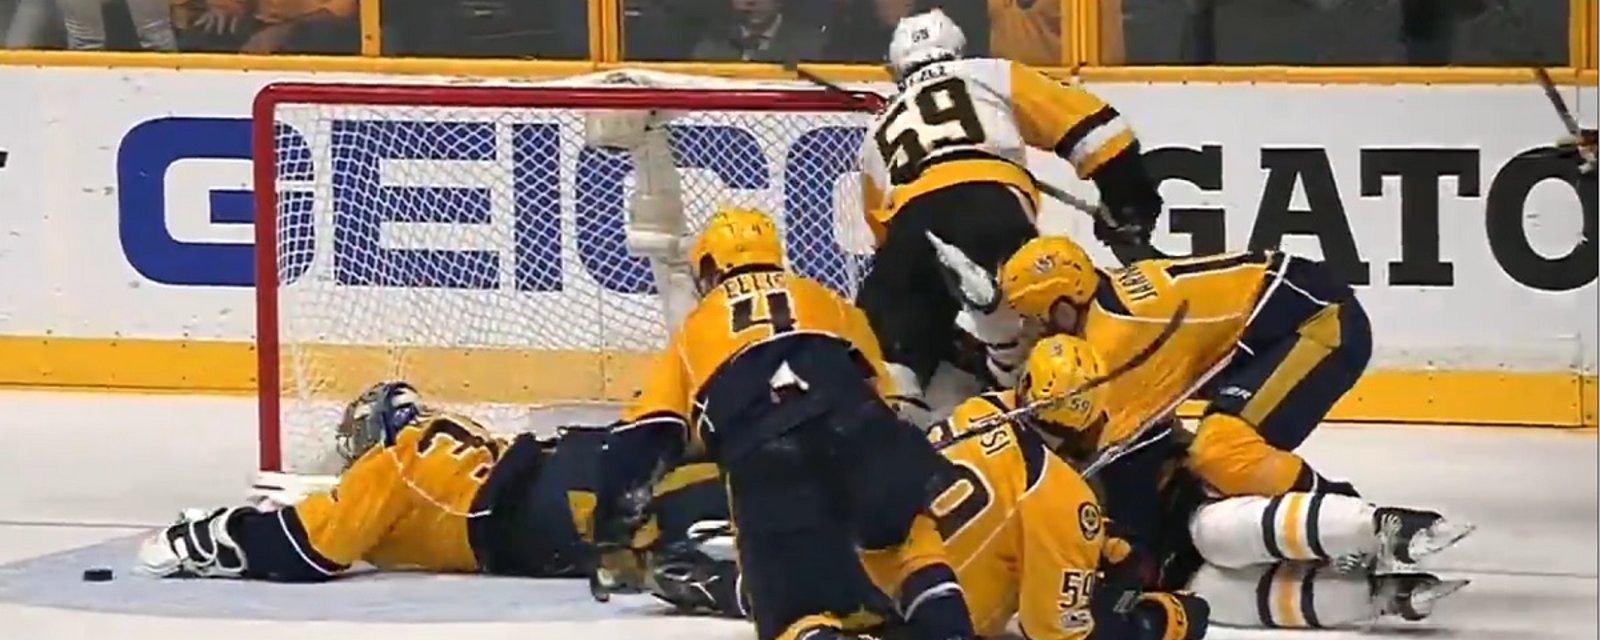 Pekka Rinne makes perhaps the best save of the season in Game 4!